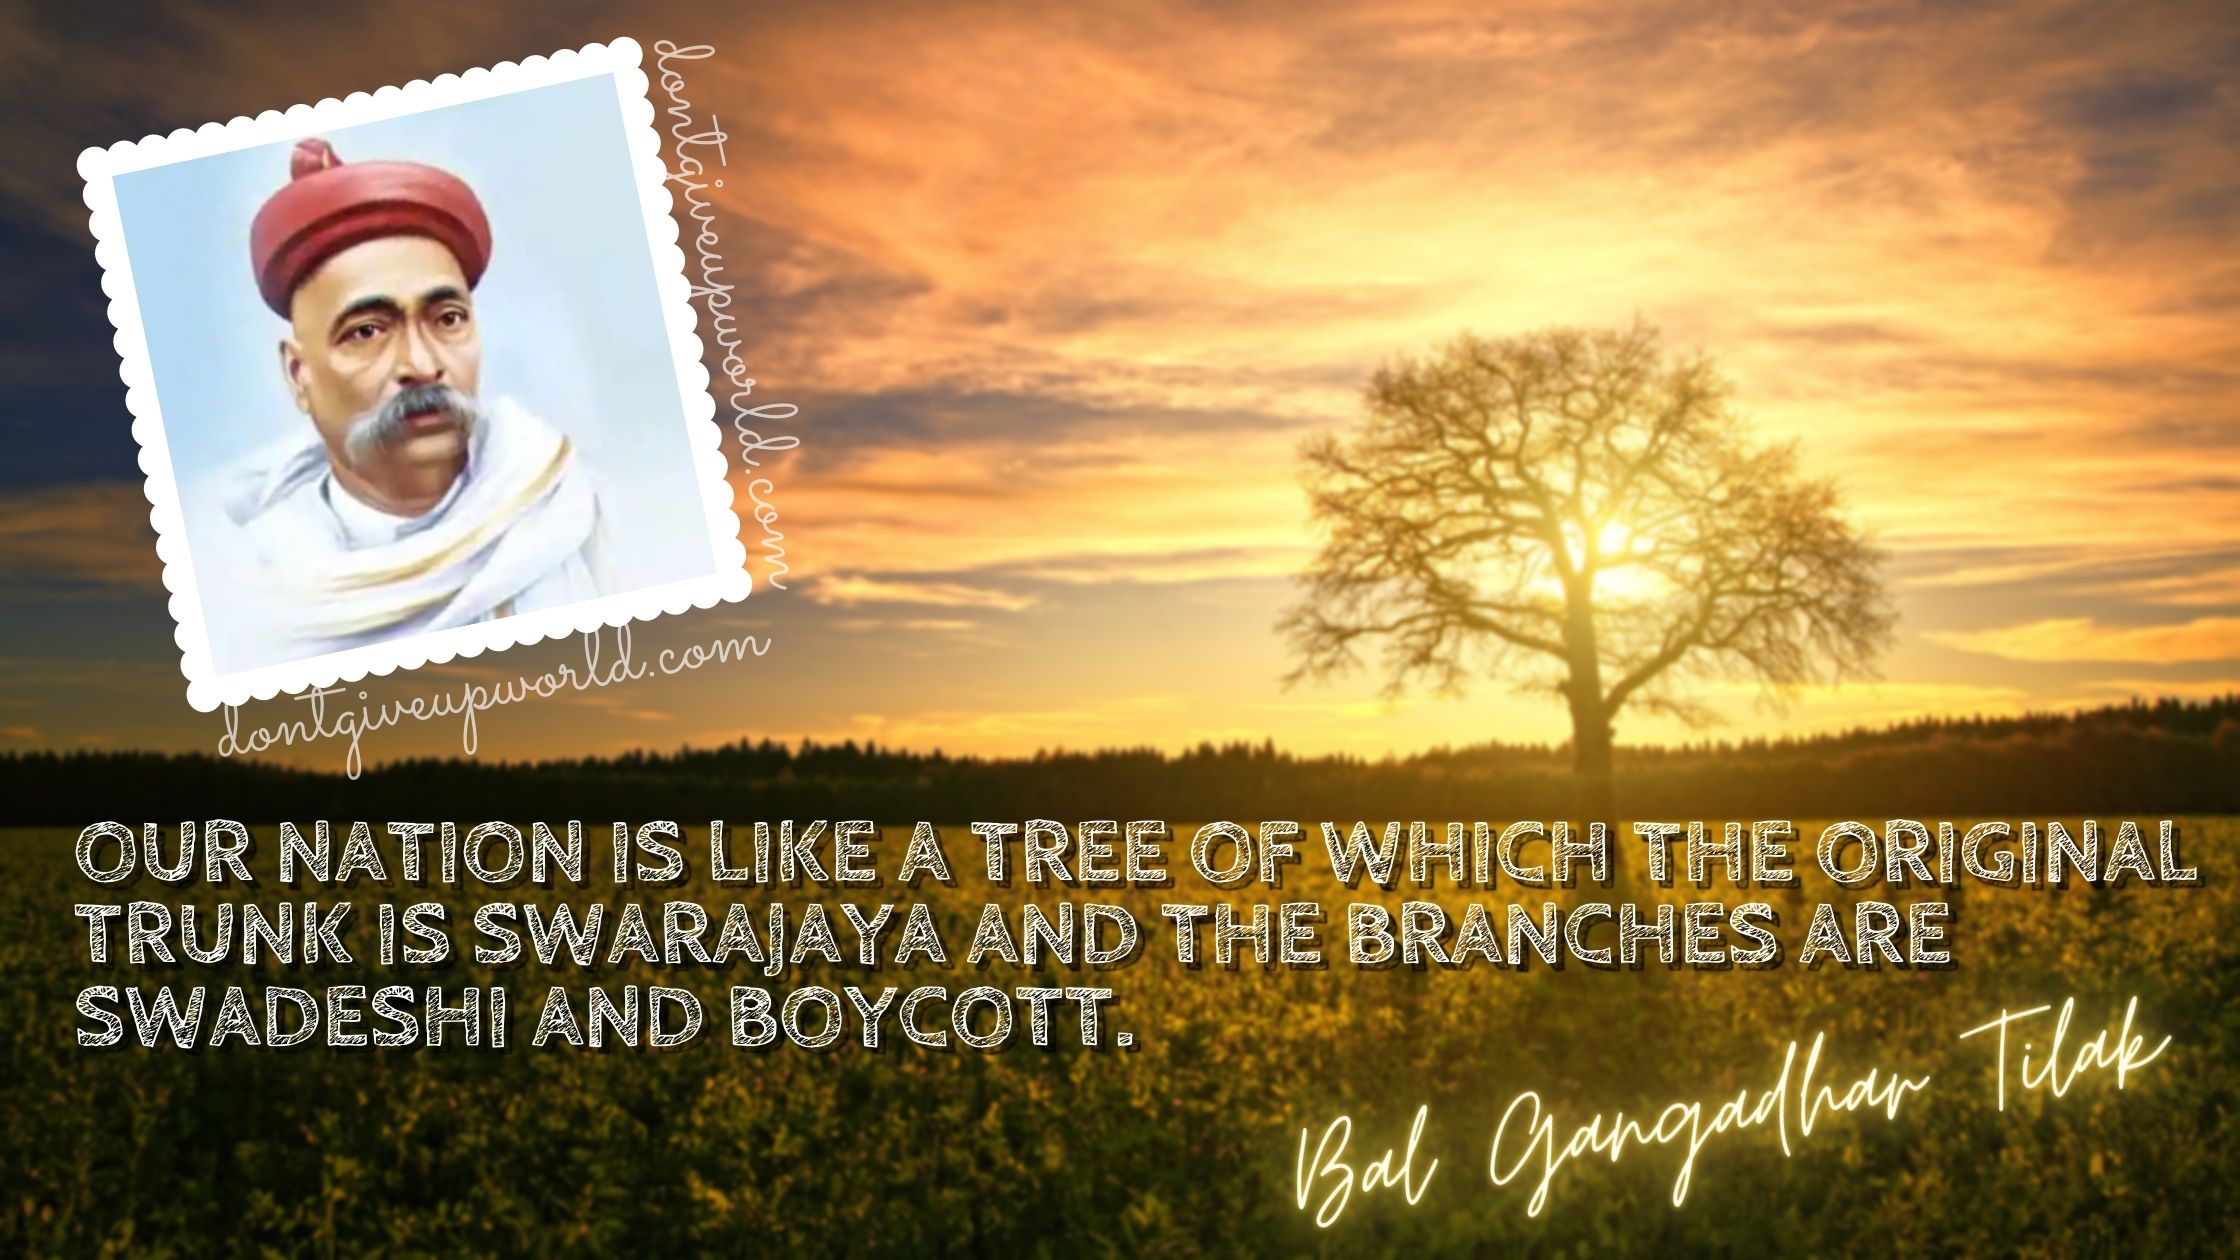 bal gangadhar wallpaper with quotes swarajaya is tree and boycott and swadeshi are its branches
Our nation is like a tree of which the original trunk is swarajaya and the branches are swadeshi and boycott.
bal gangadhar tilak 100th death anniversary
sunset in fields